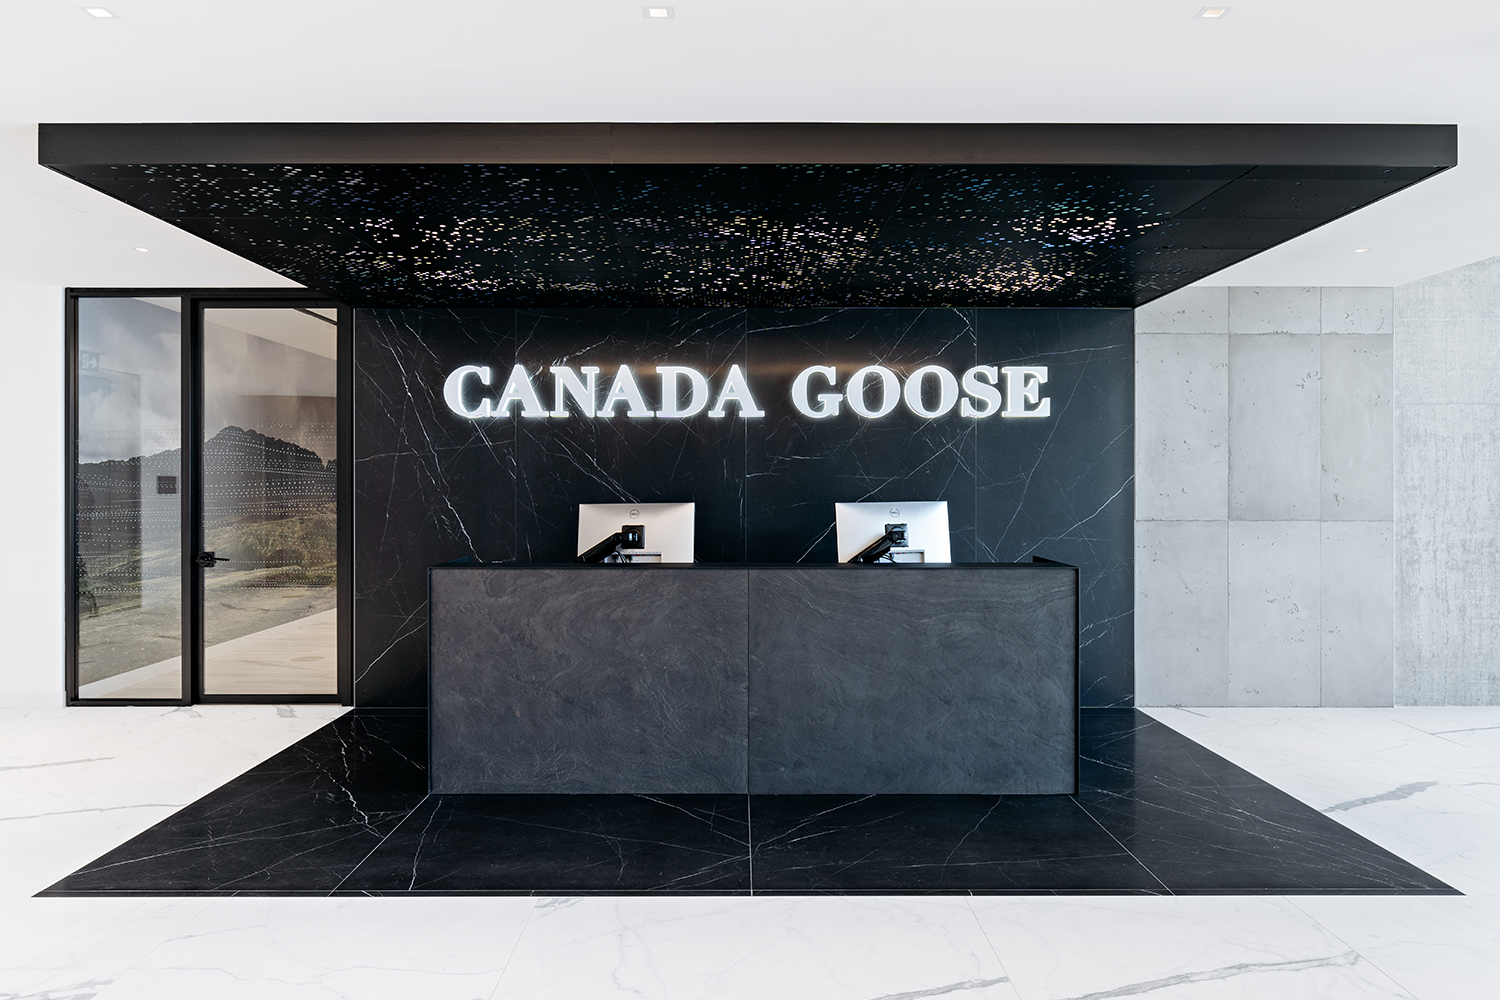 The front desk of the Canada Goose headquarters in Toronto